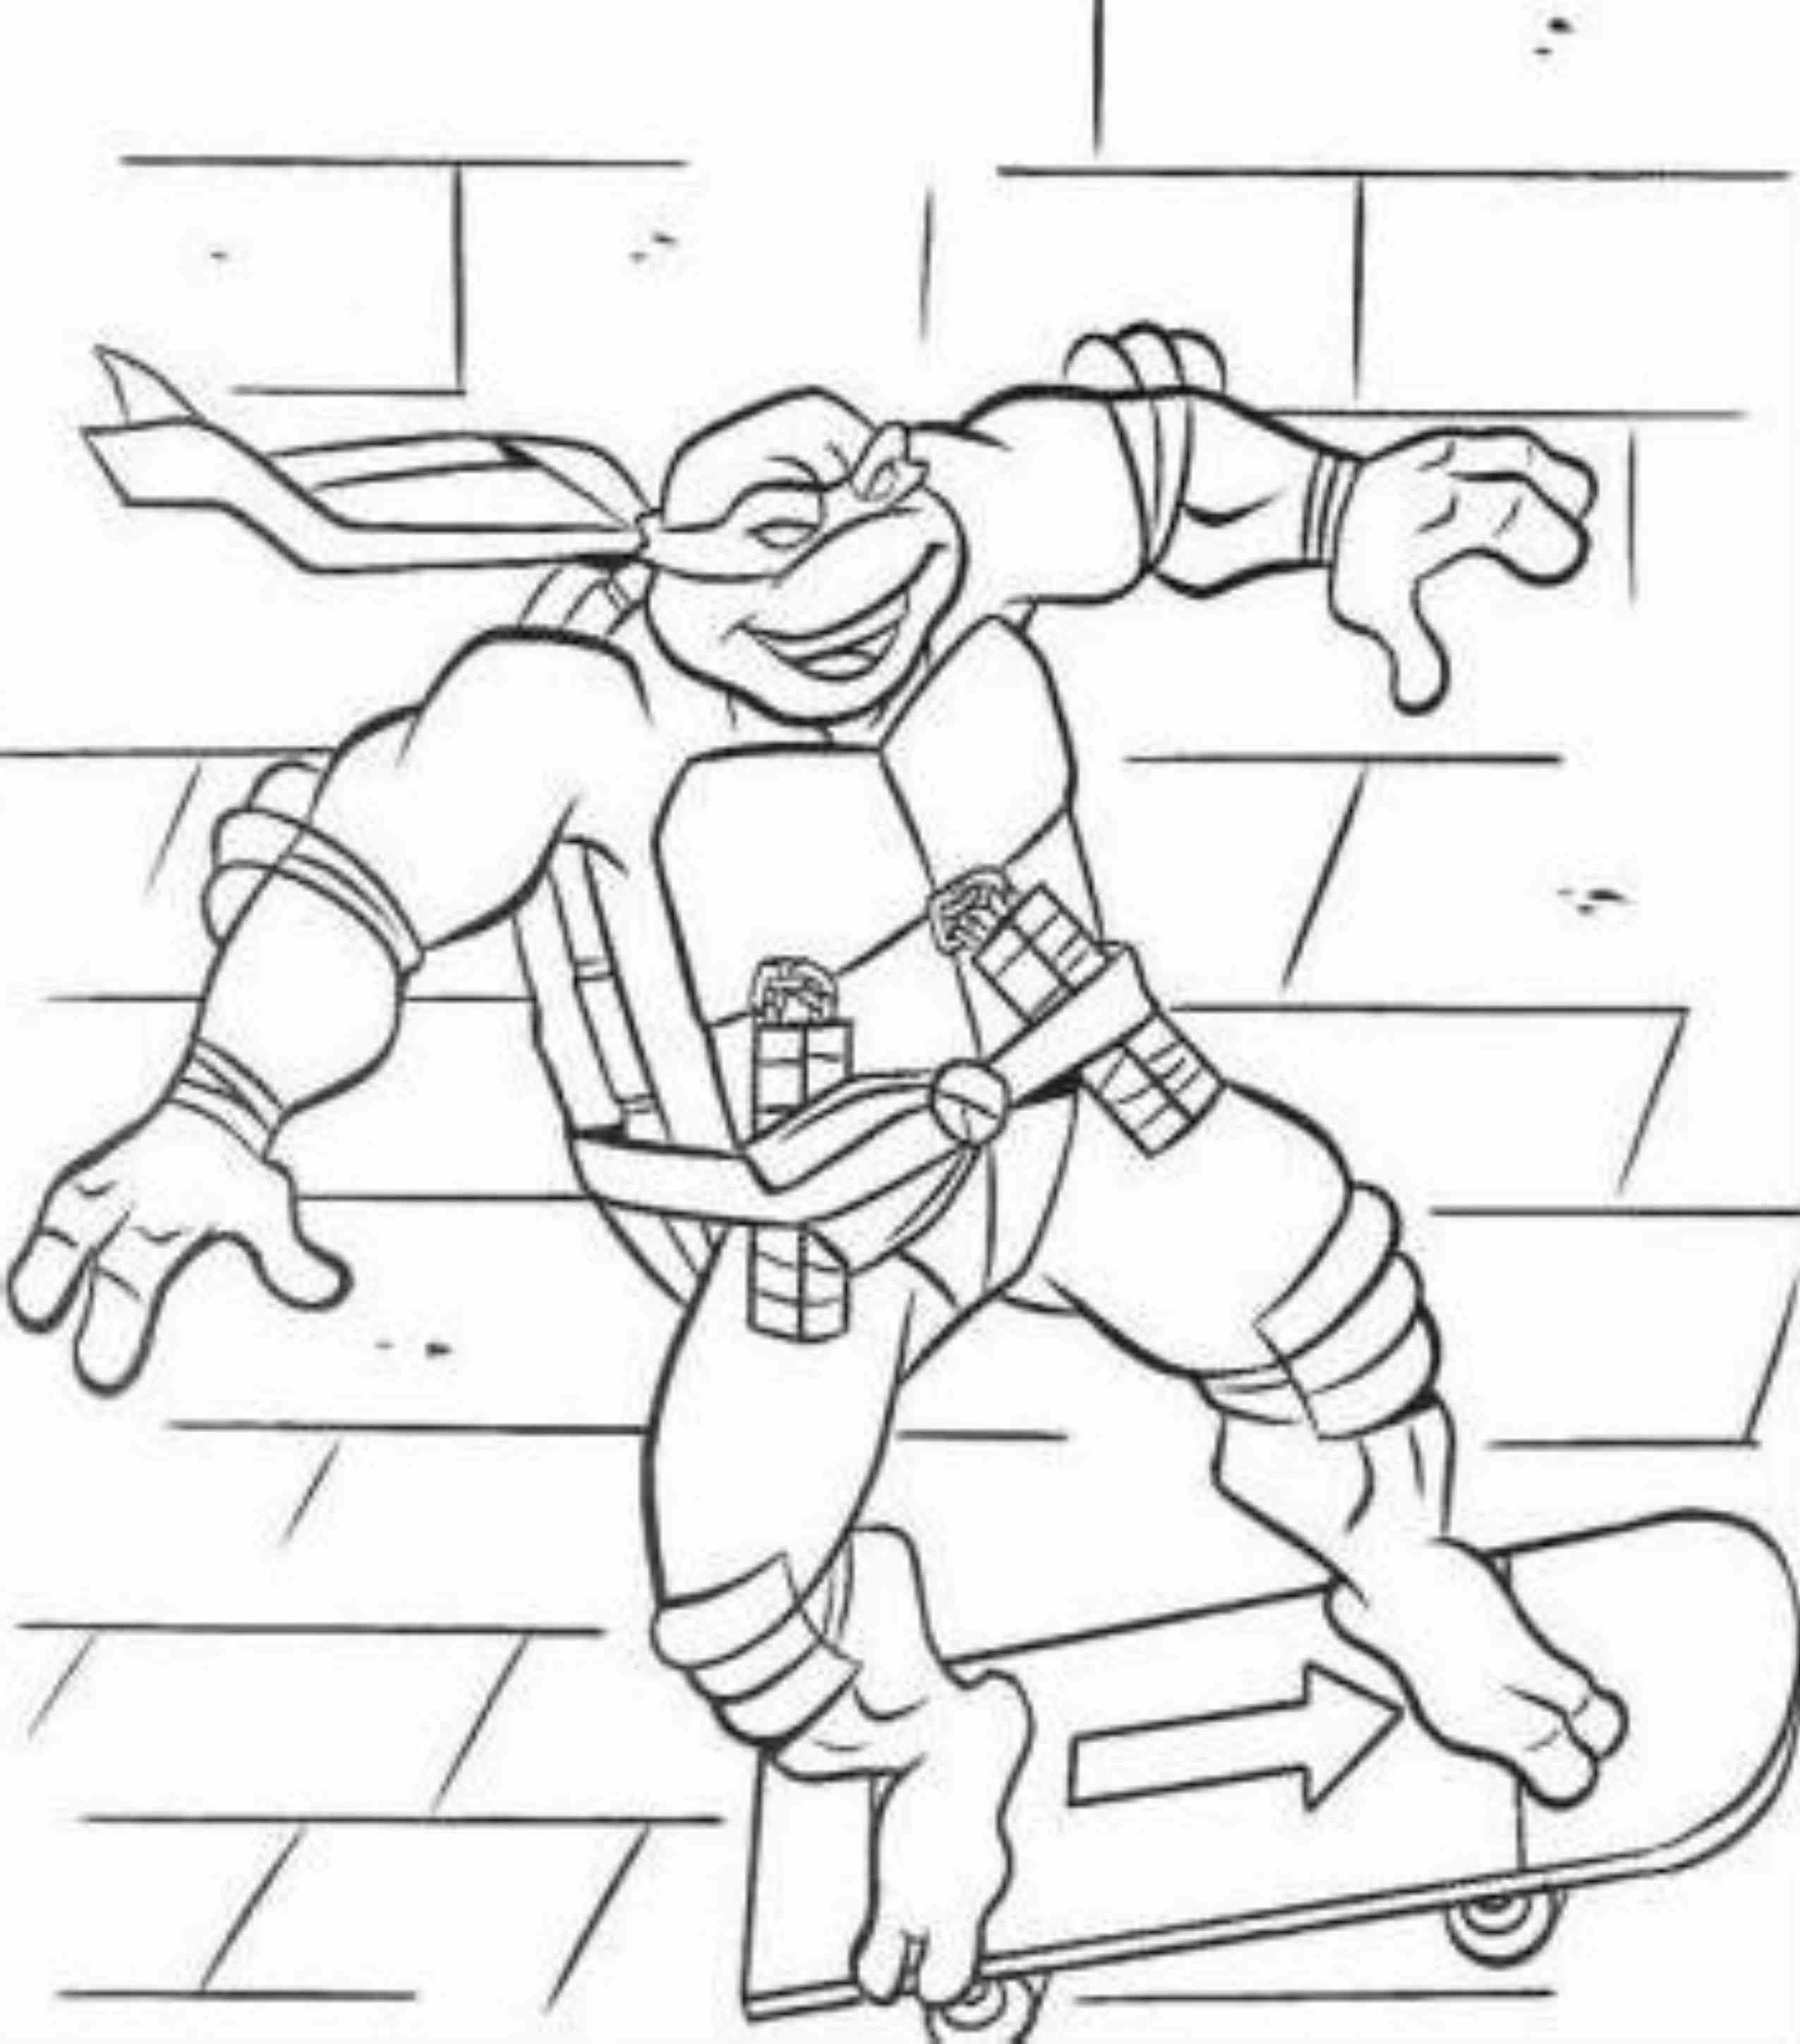 14 Free Pictures for: Ninja Turtle Coloring Page. Temoon.us